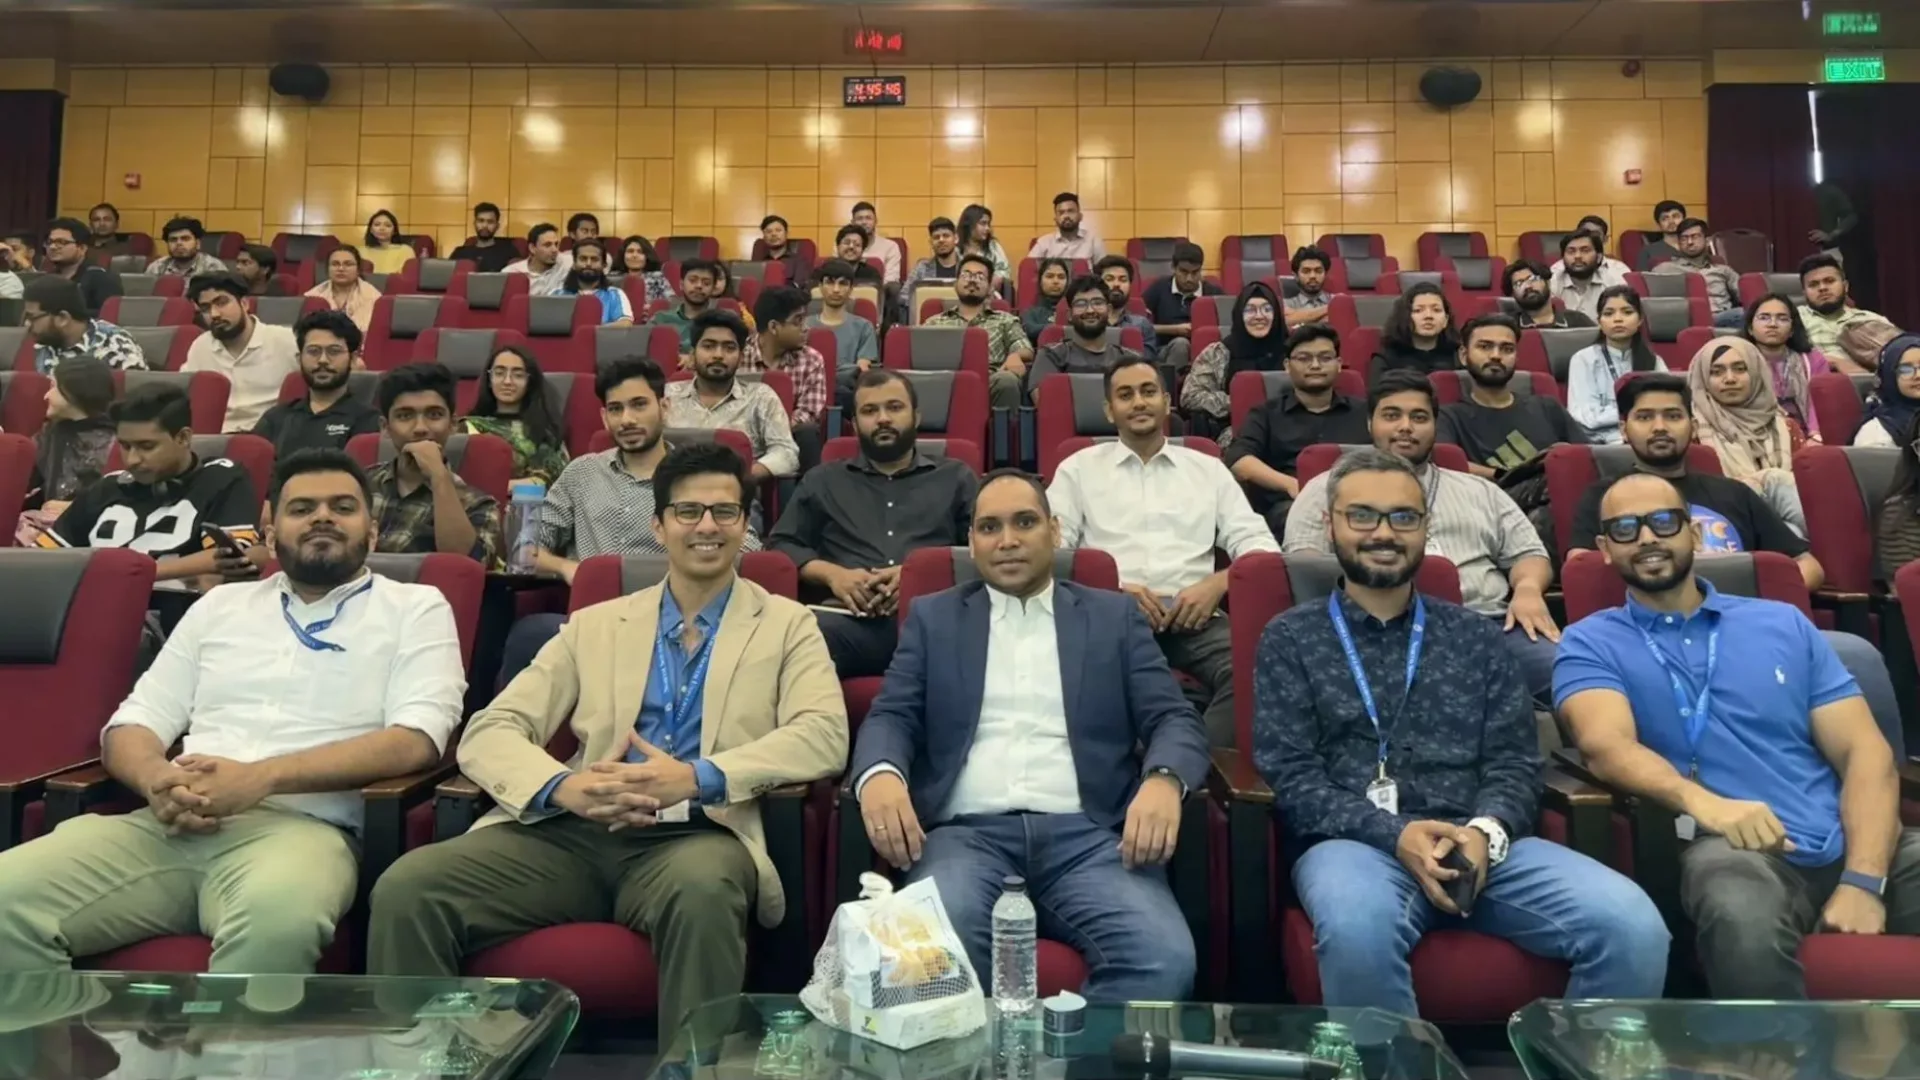 Bijon Islam Participates in “Ask Me Anything” Session Organized by NSU Startups Next